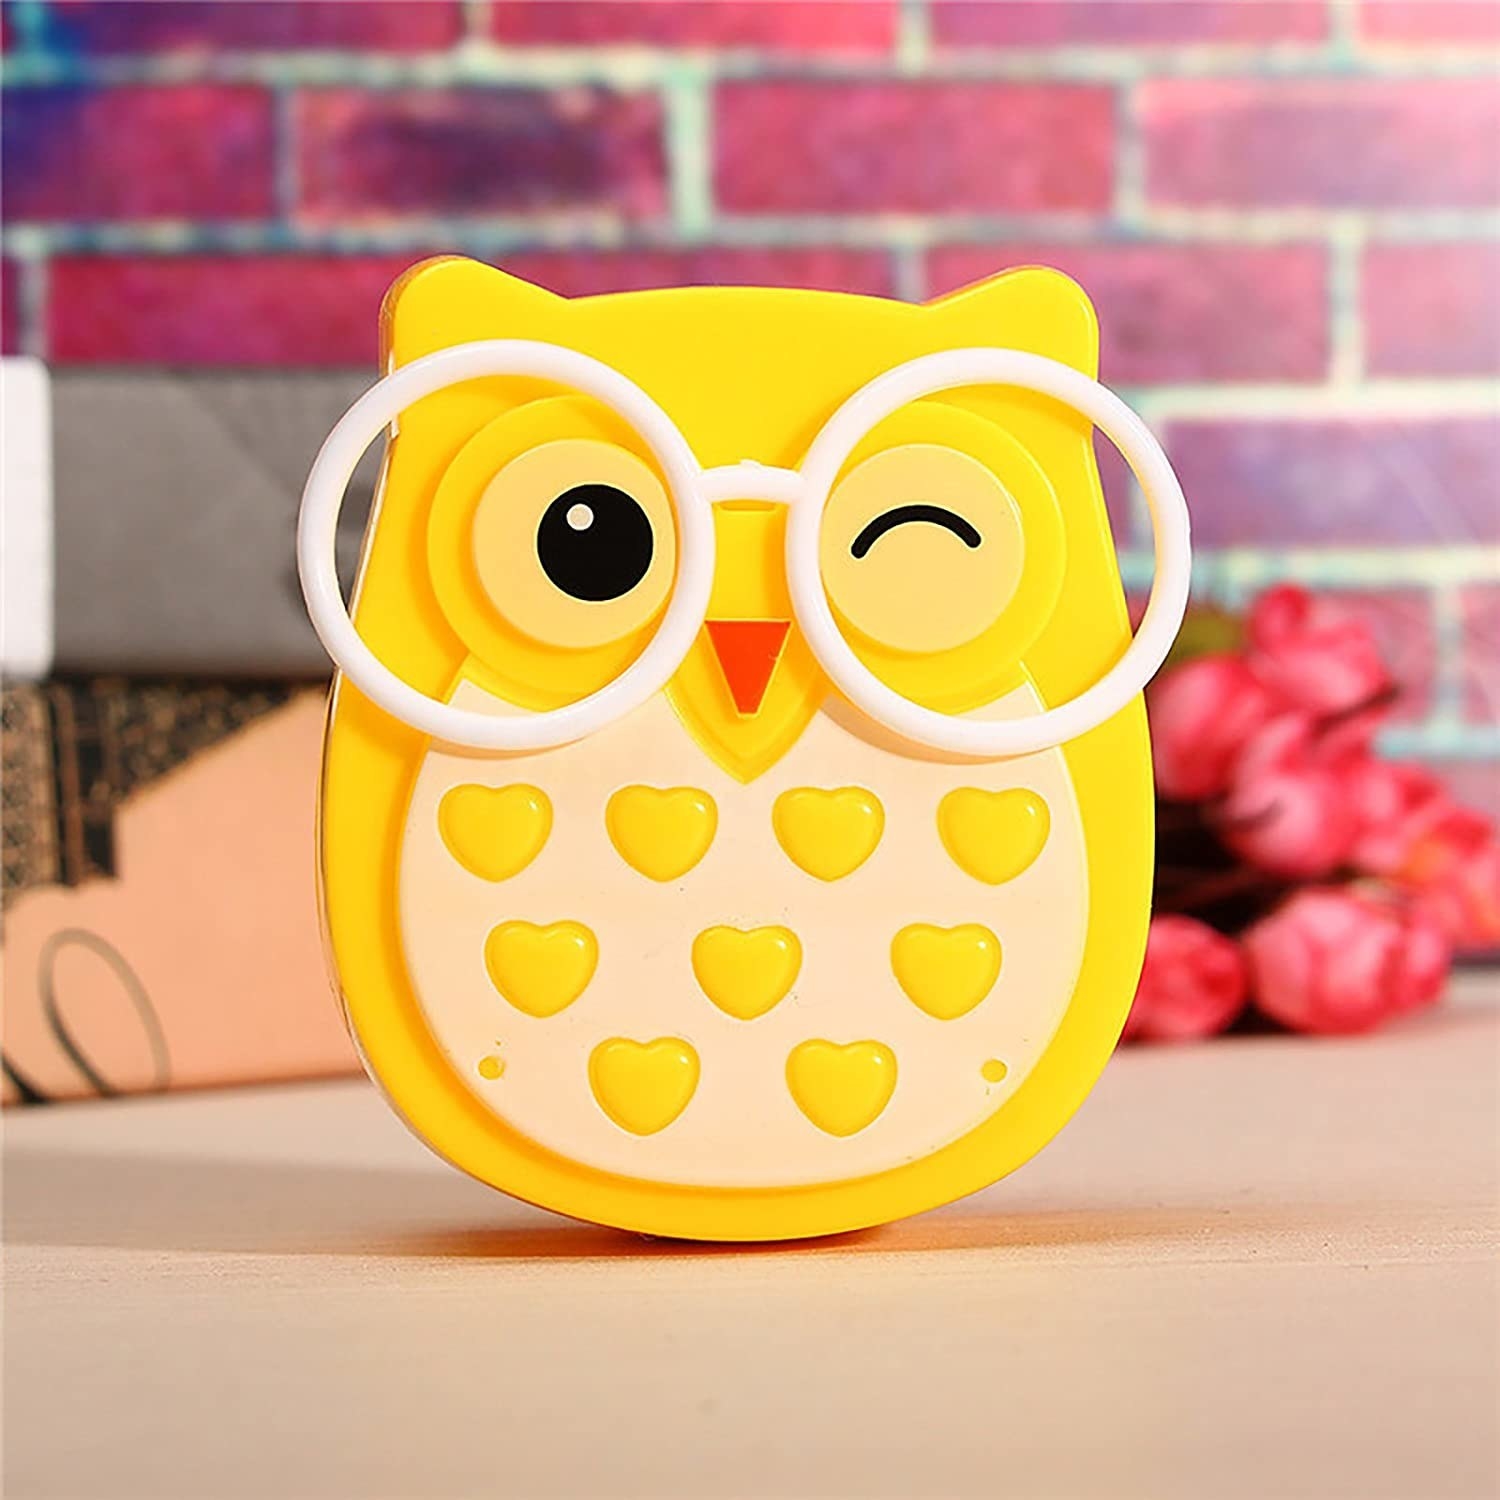 A yellow owl night lamp wearing glasses and winking